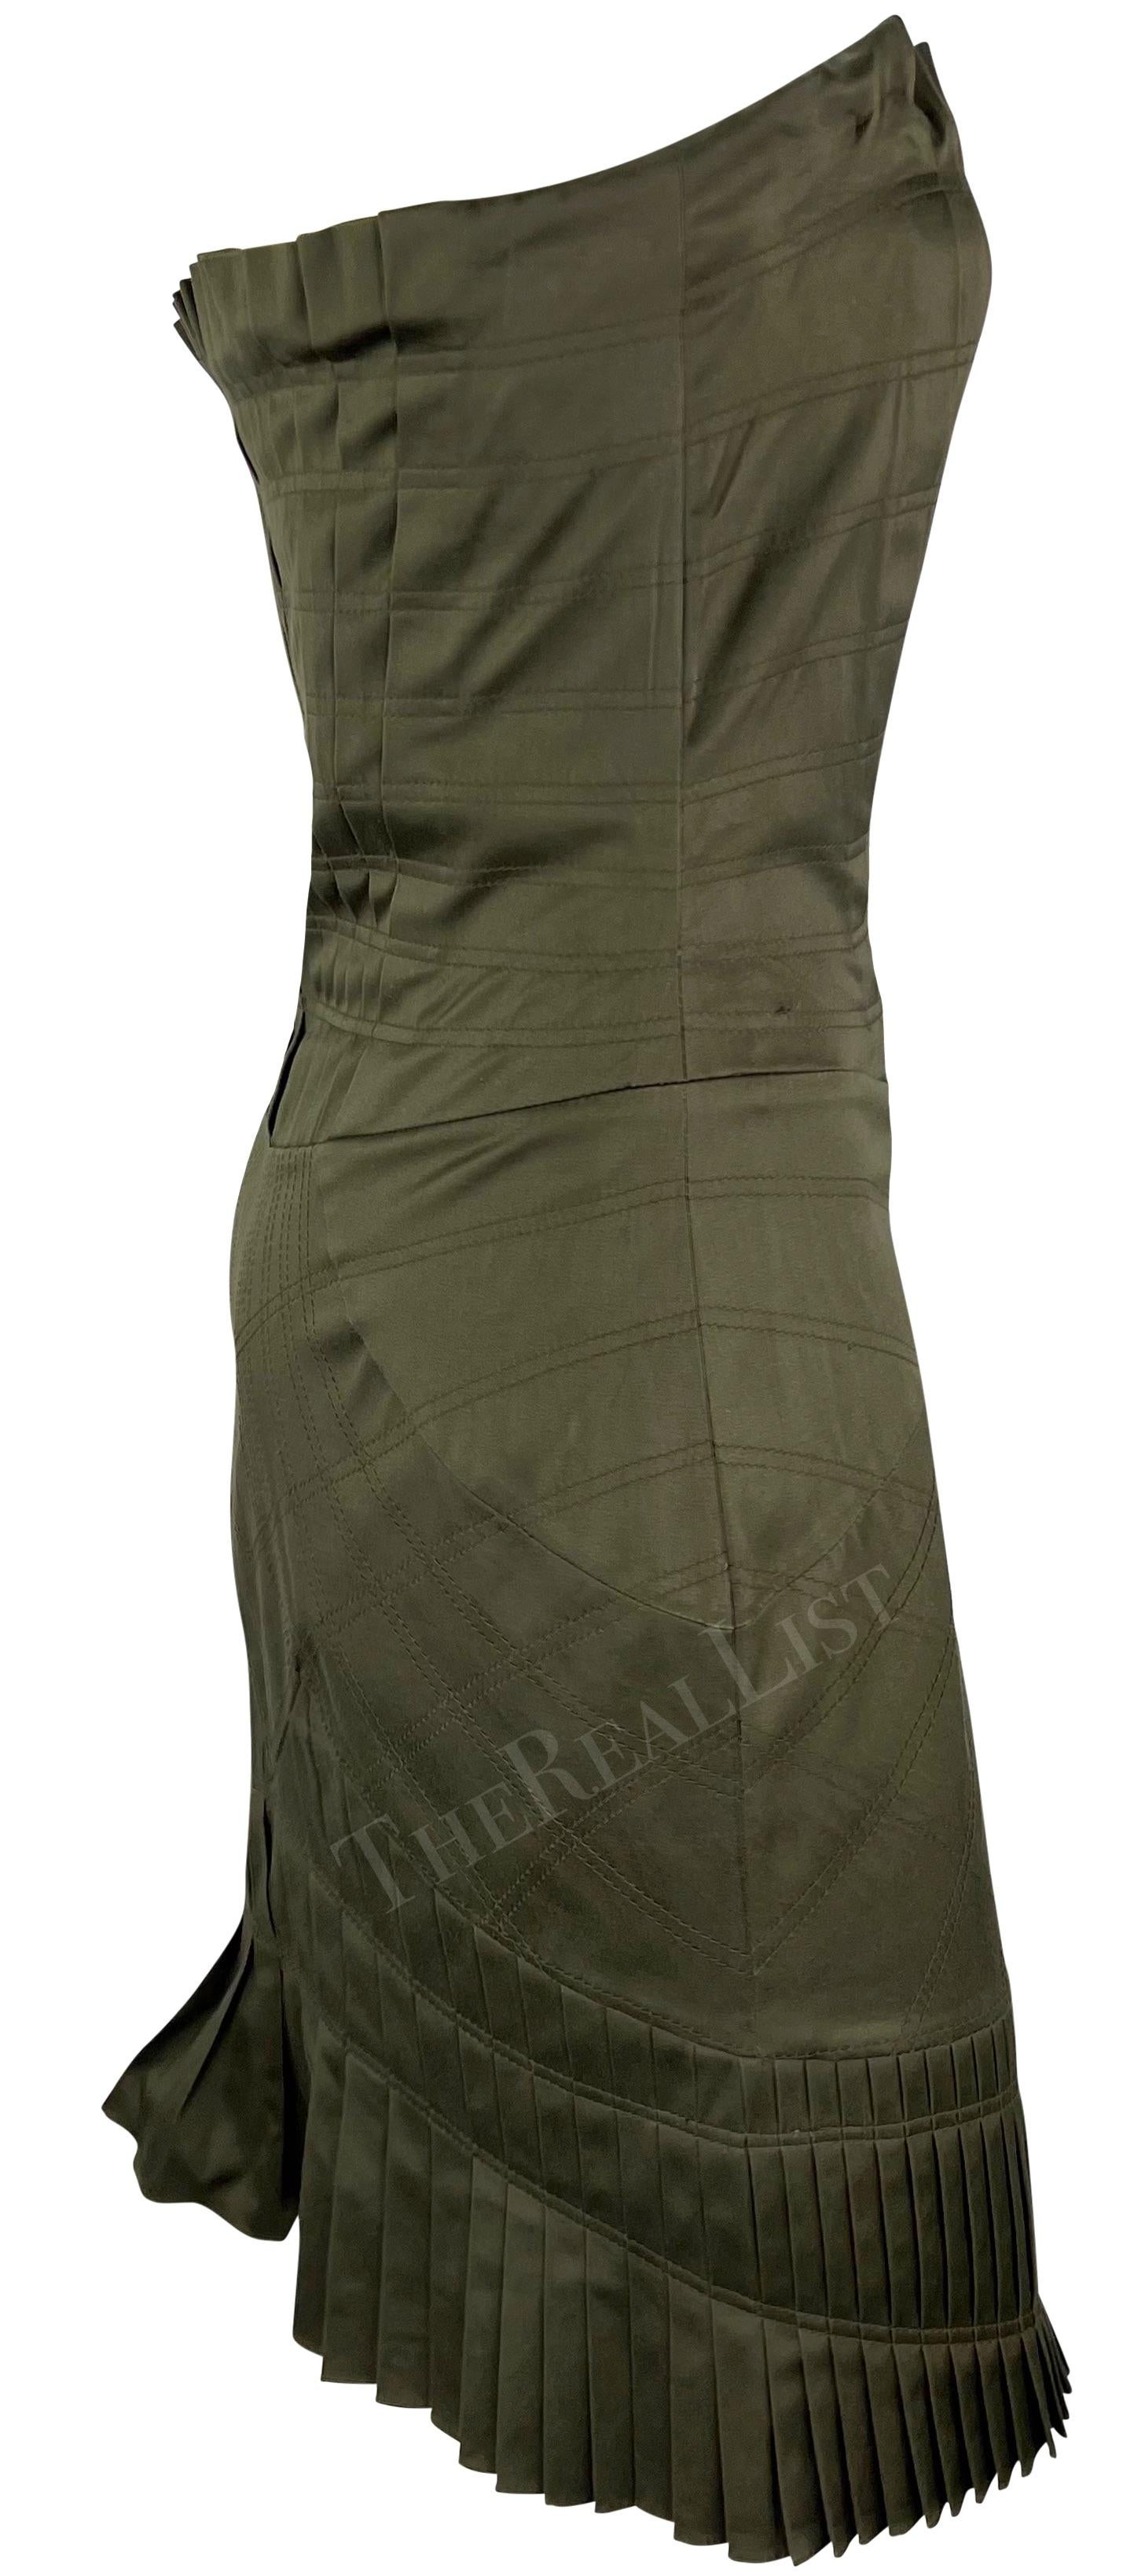 S/S 2004 Gucci by Tom Ford Olive Green Fan Pleated Strapless Mini Dress For Sale 1